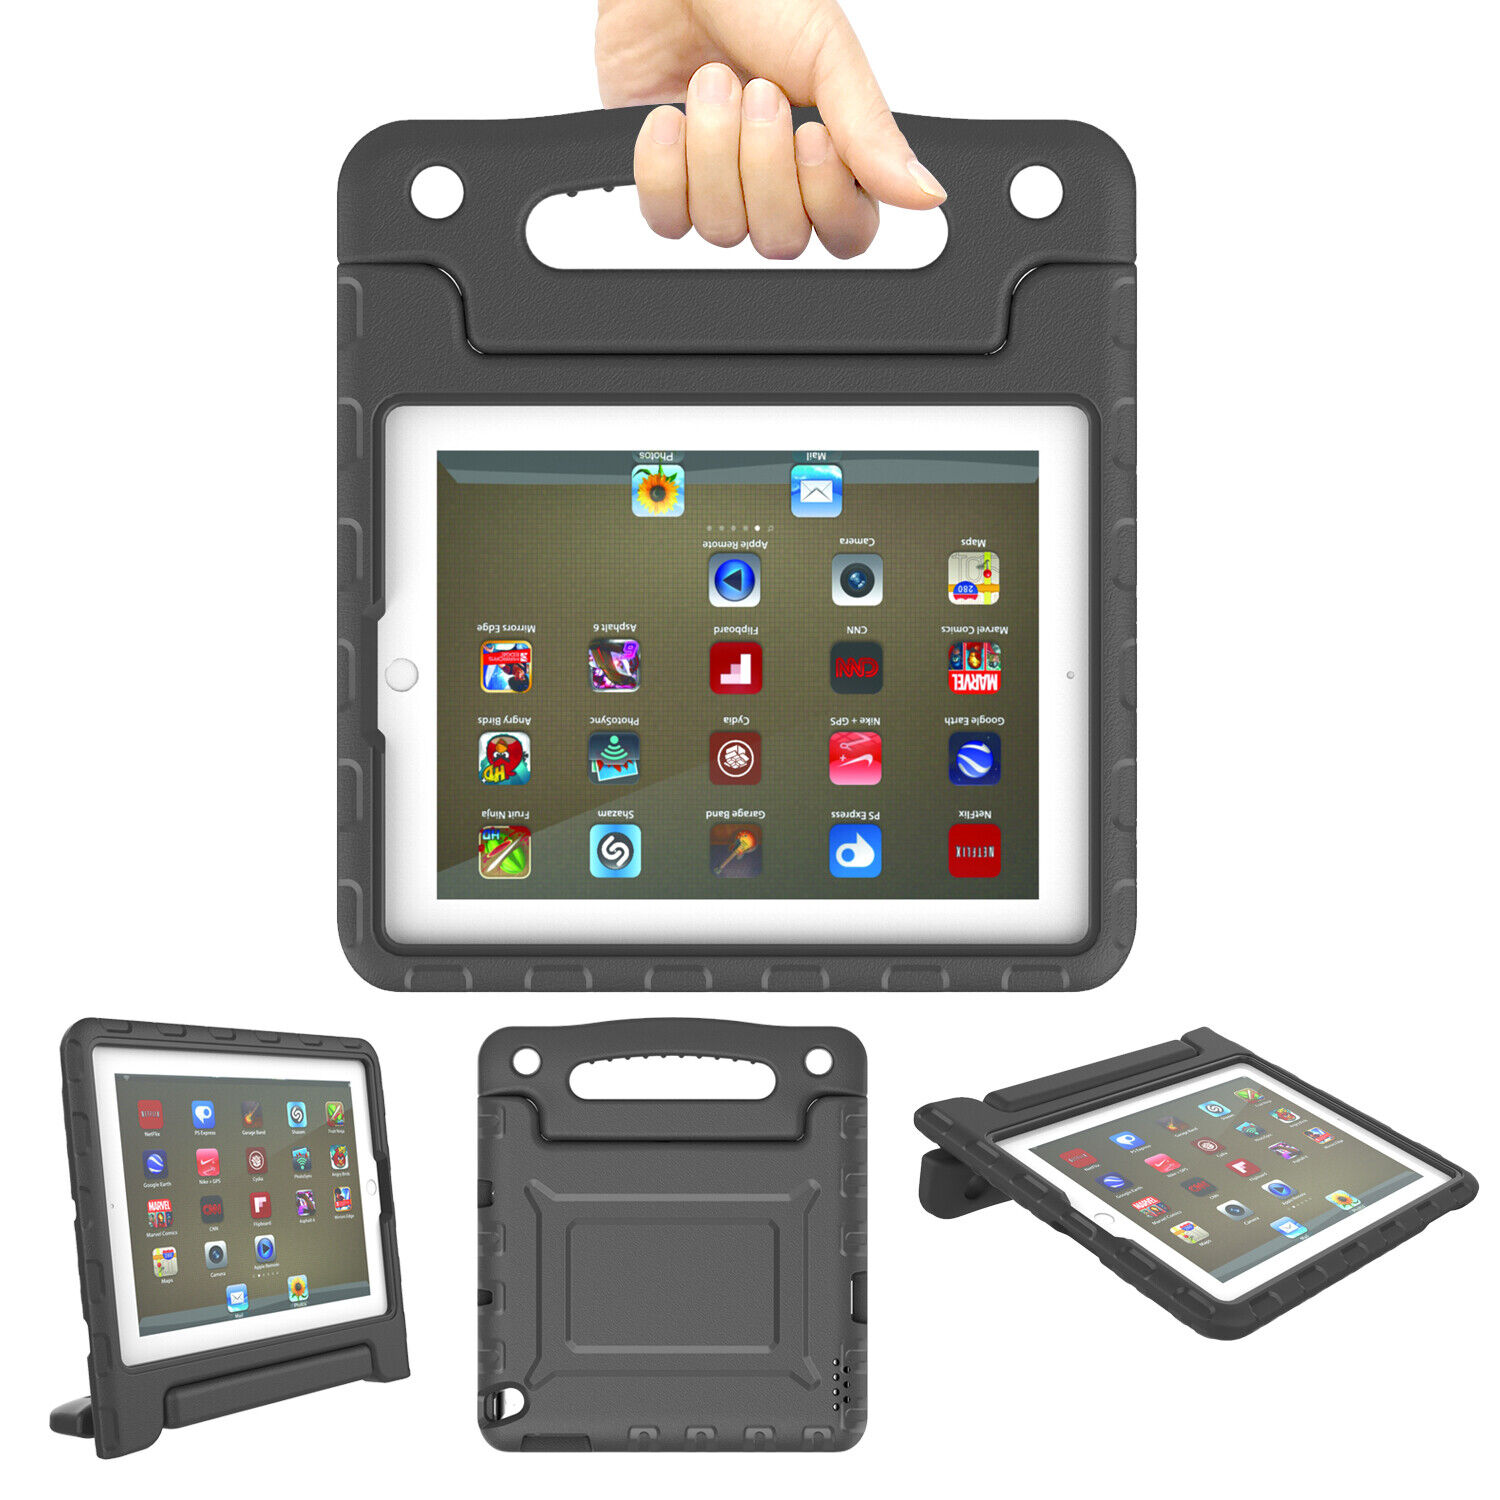 Kids Case for iPad 2nd, 3rd, 4th- Generation Lightweight Shockproof Handle Stand